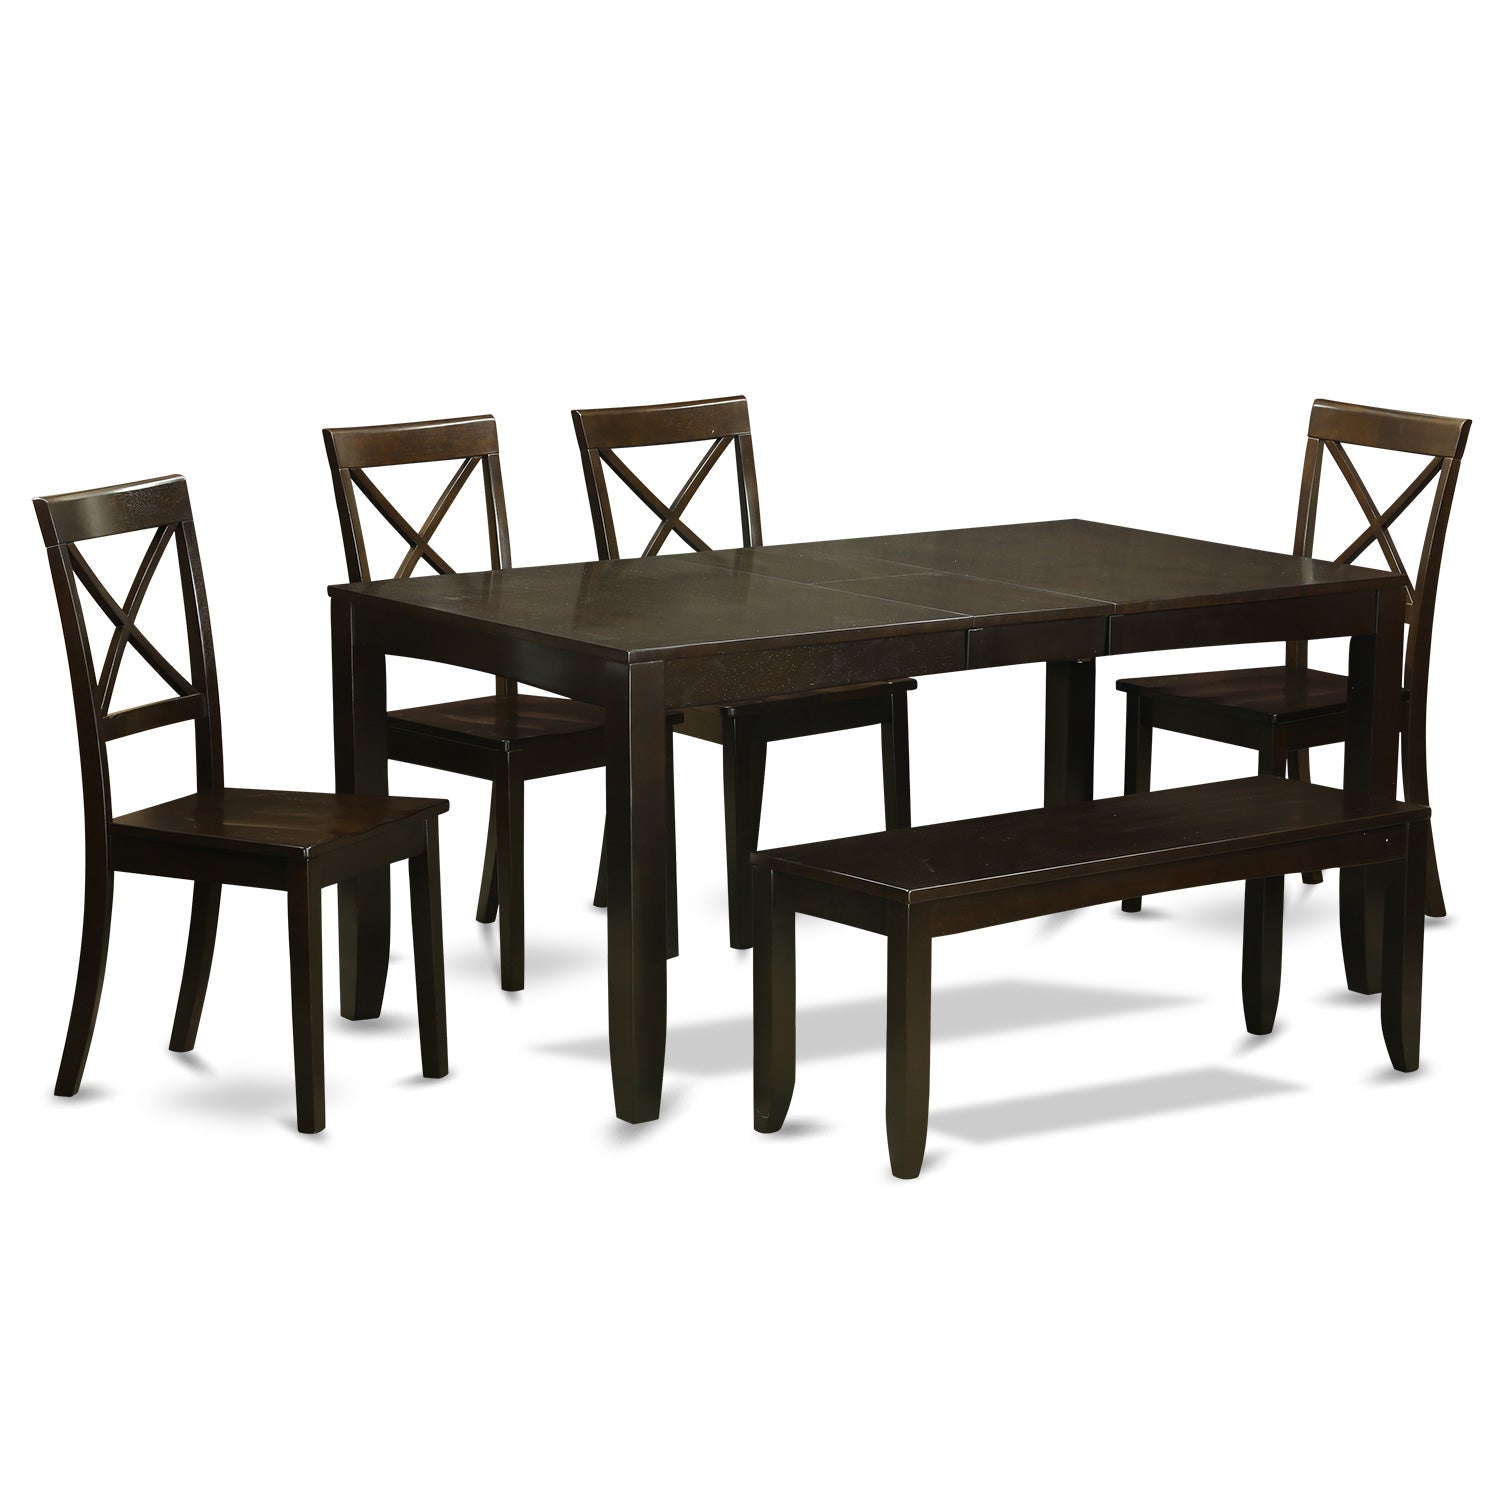 LYBO6-CAP-W 6 Pc Dining Table with bench-Dining Table and 4 Kitchen Dining Chairs plus Bench